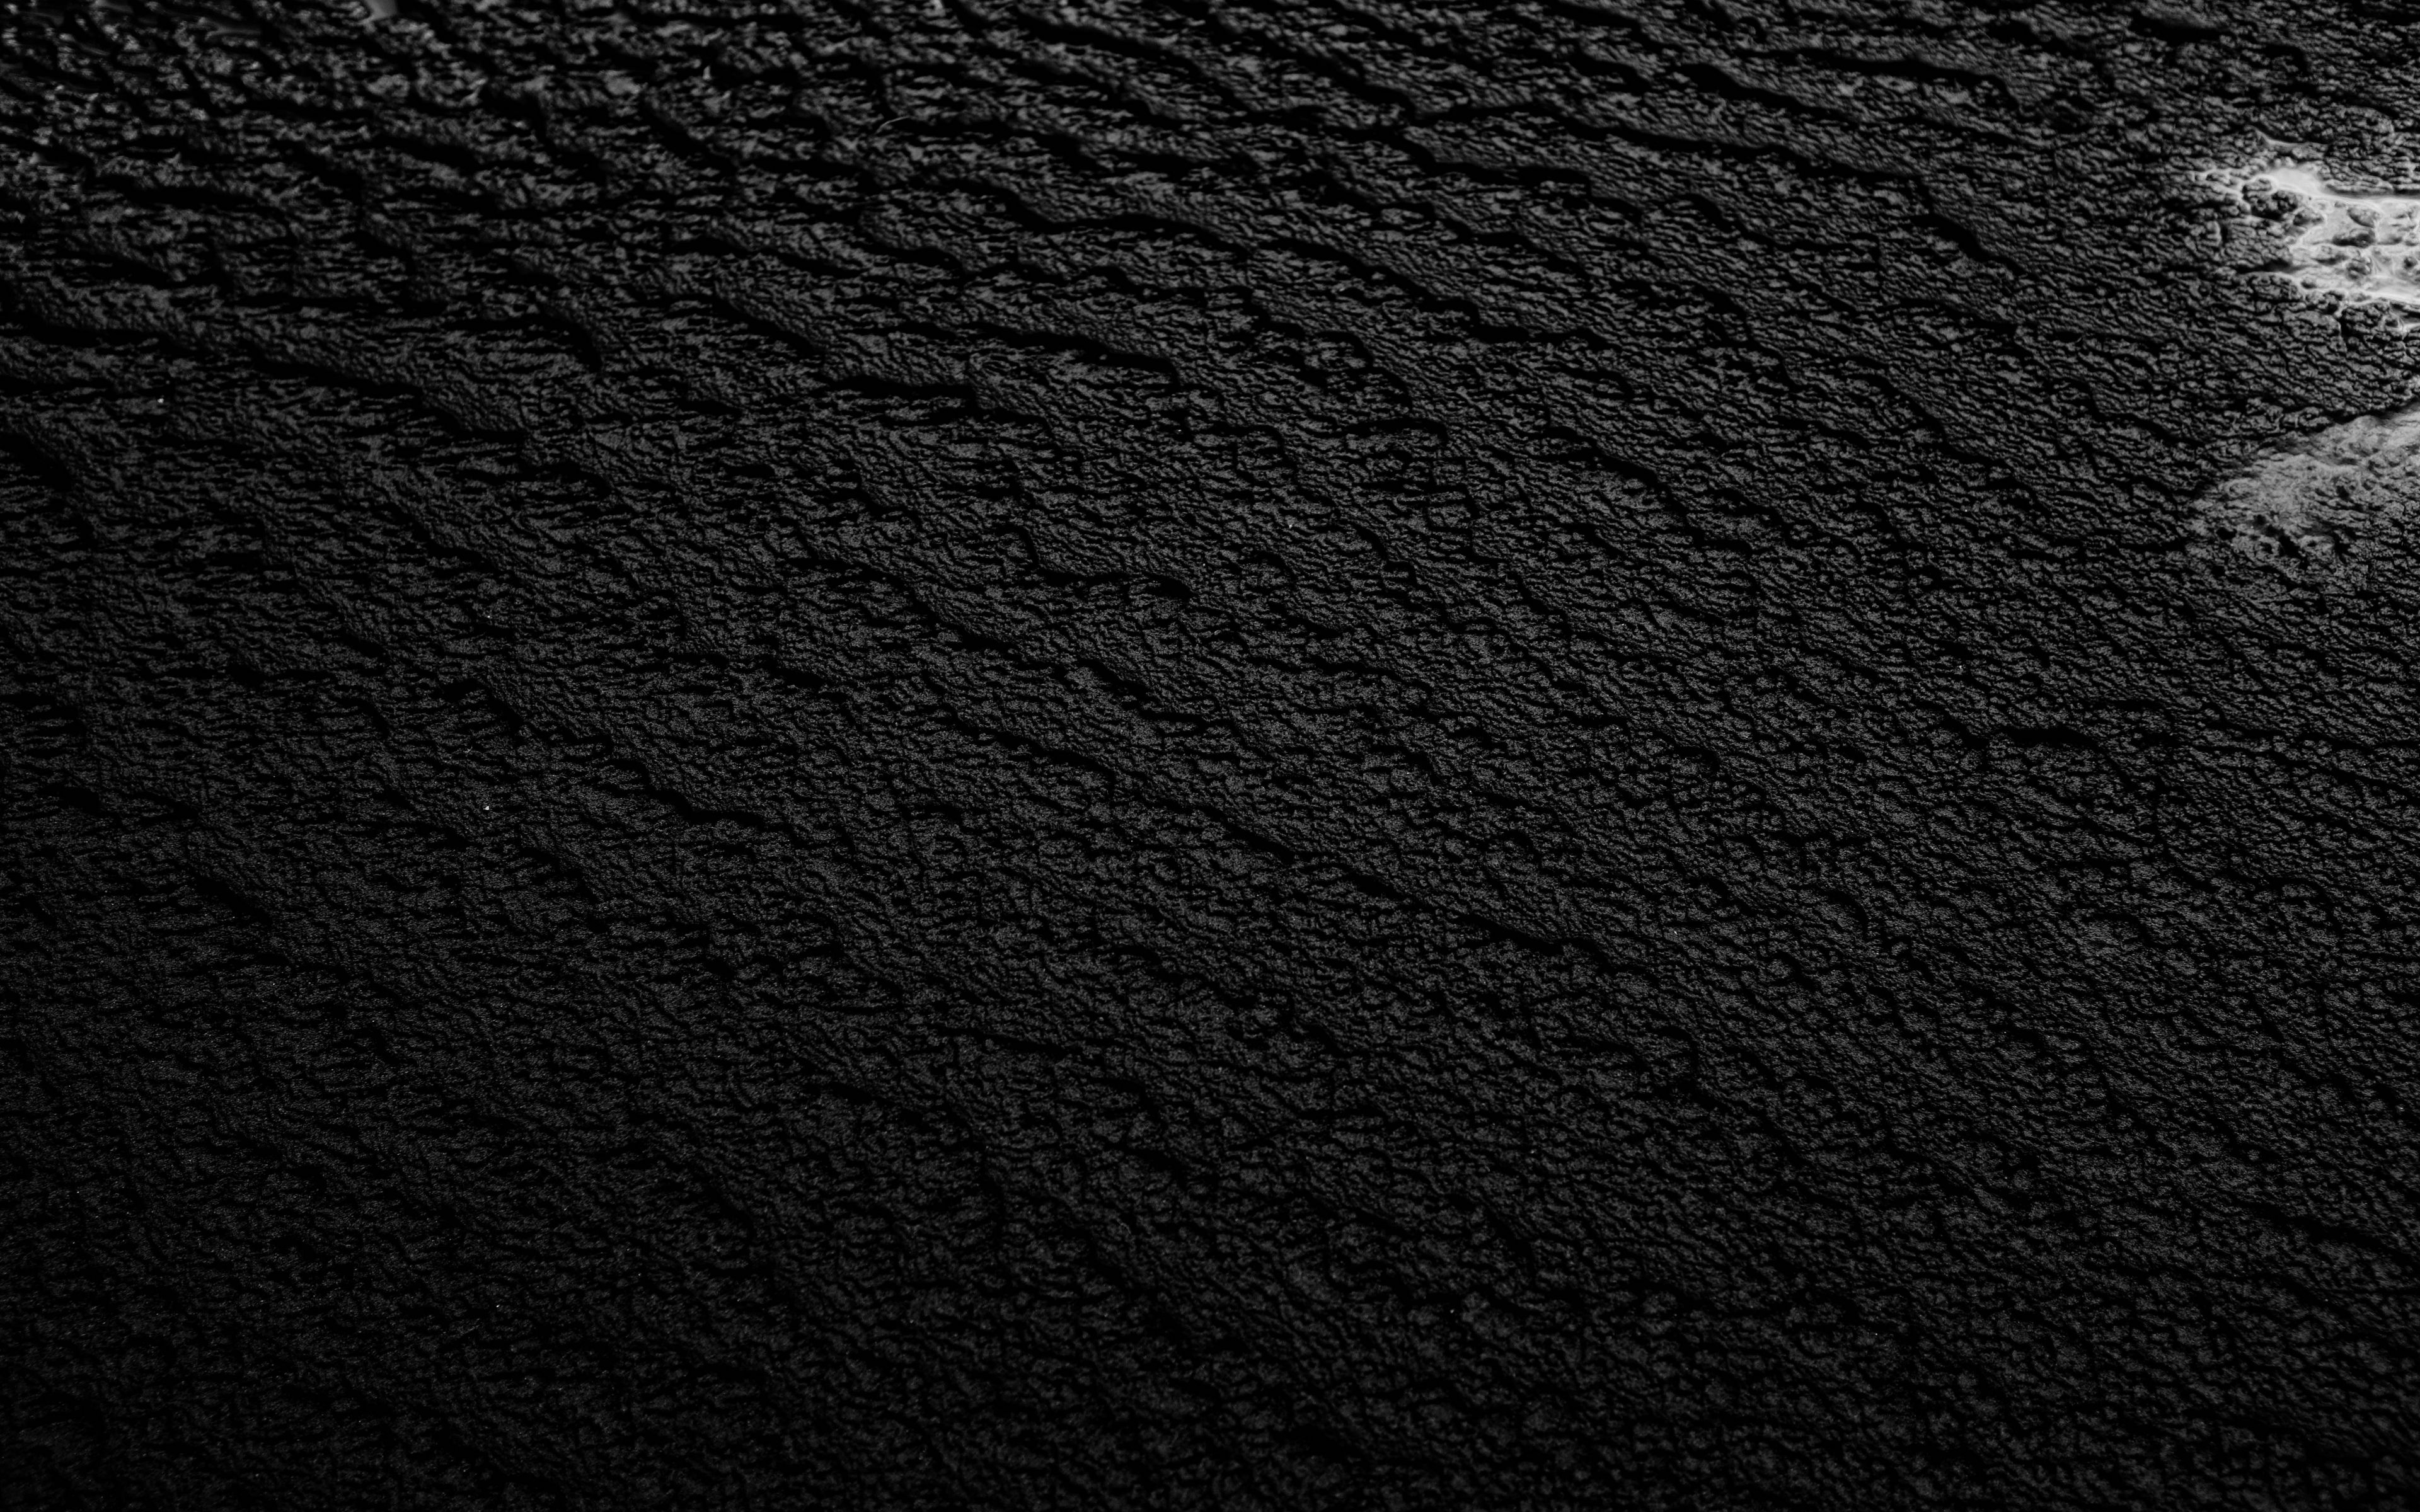 Dark 4k ultra hd 16:10 wallpapers hd, desktop backgrounds 3840x2400, images  and pictures